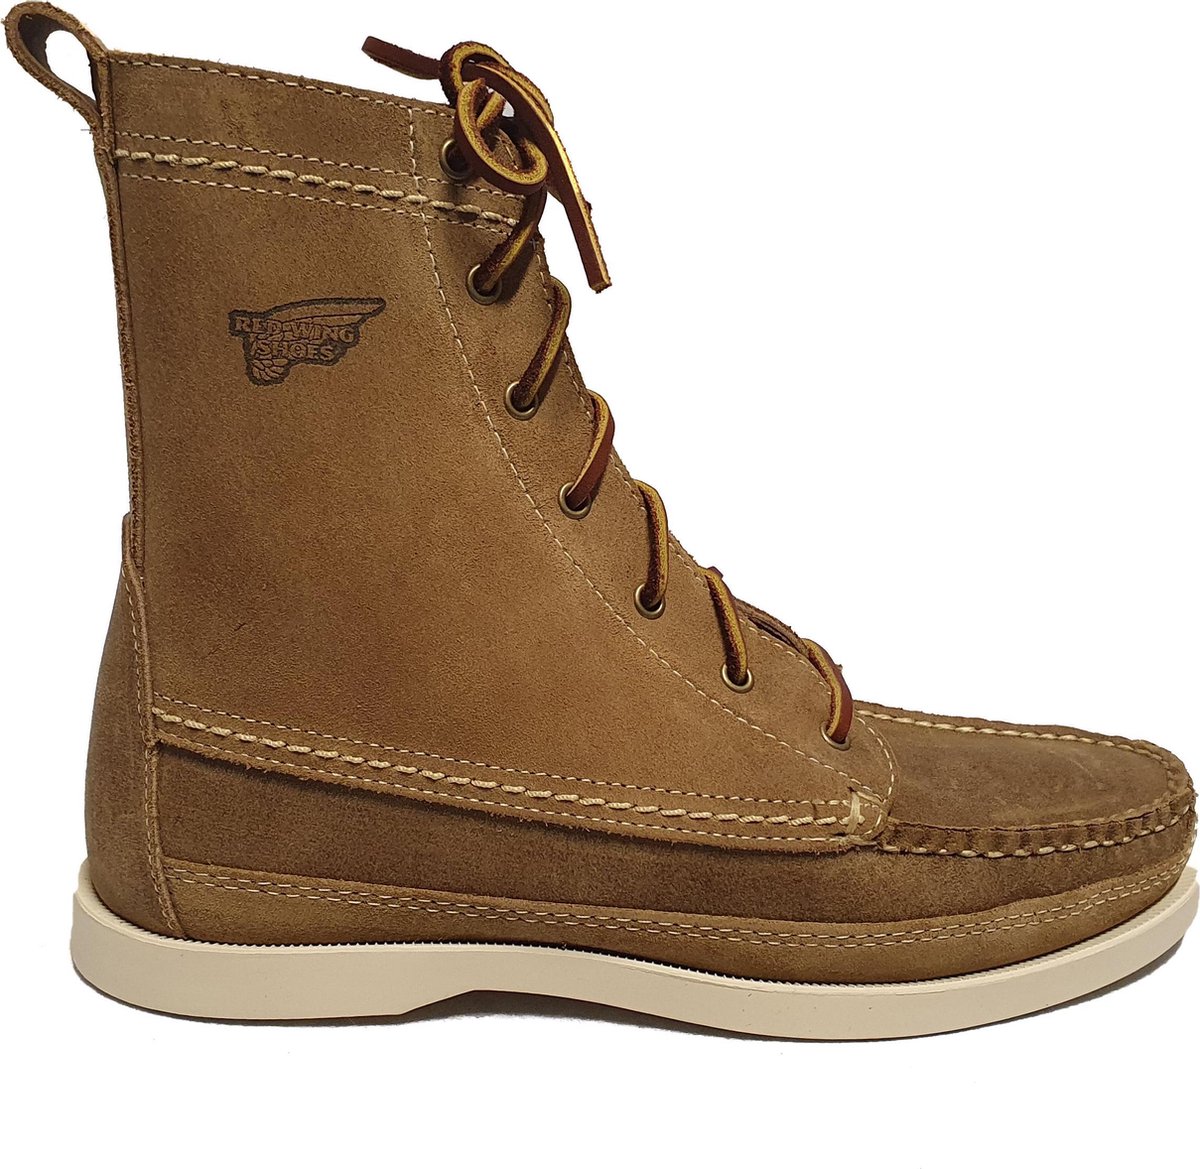 Red wing Wabasha Boat Boot Suede 07190 Camel